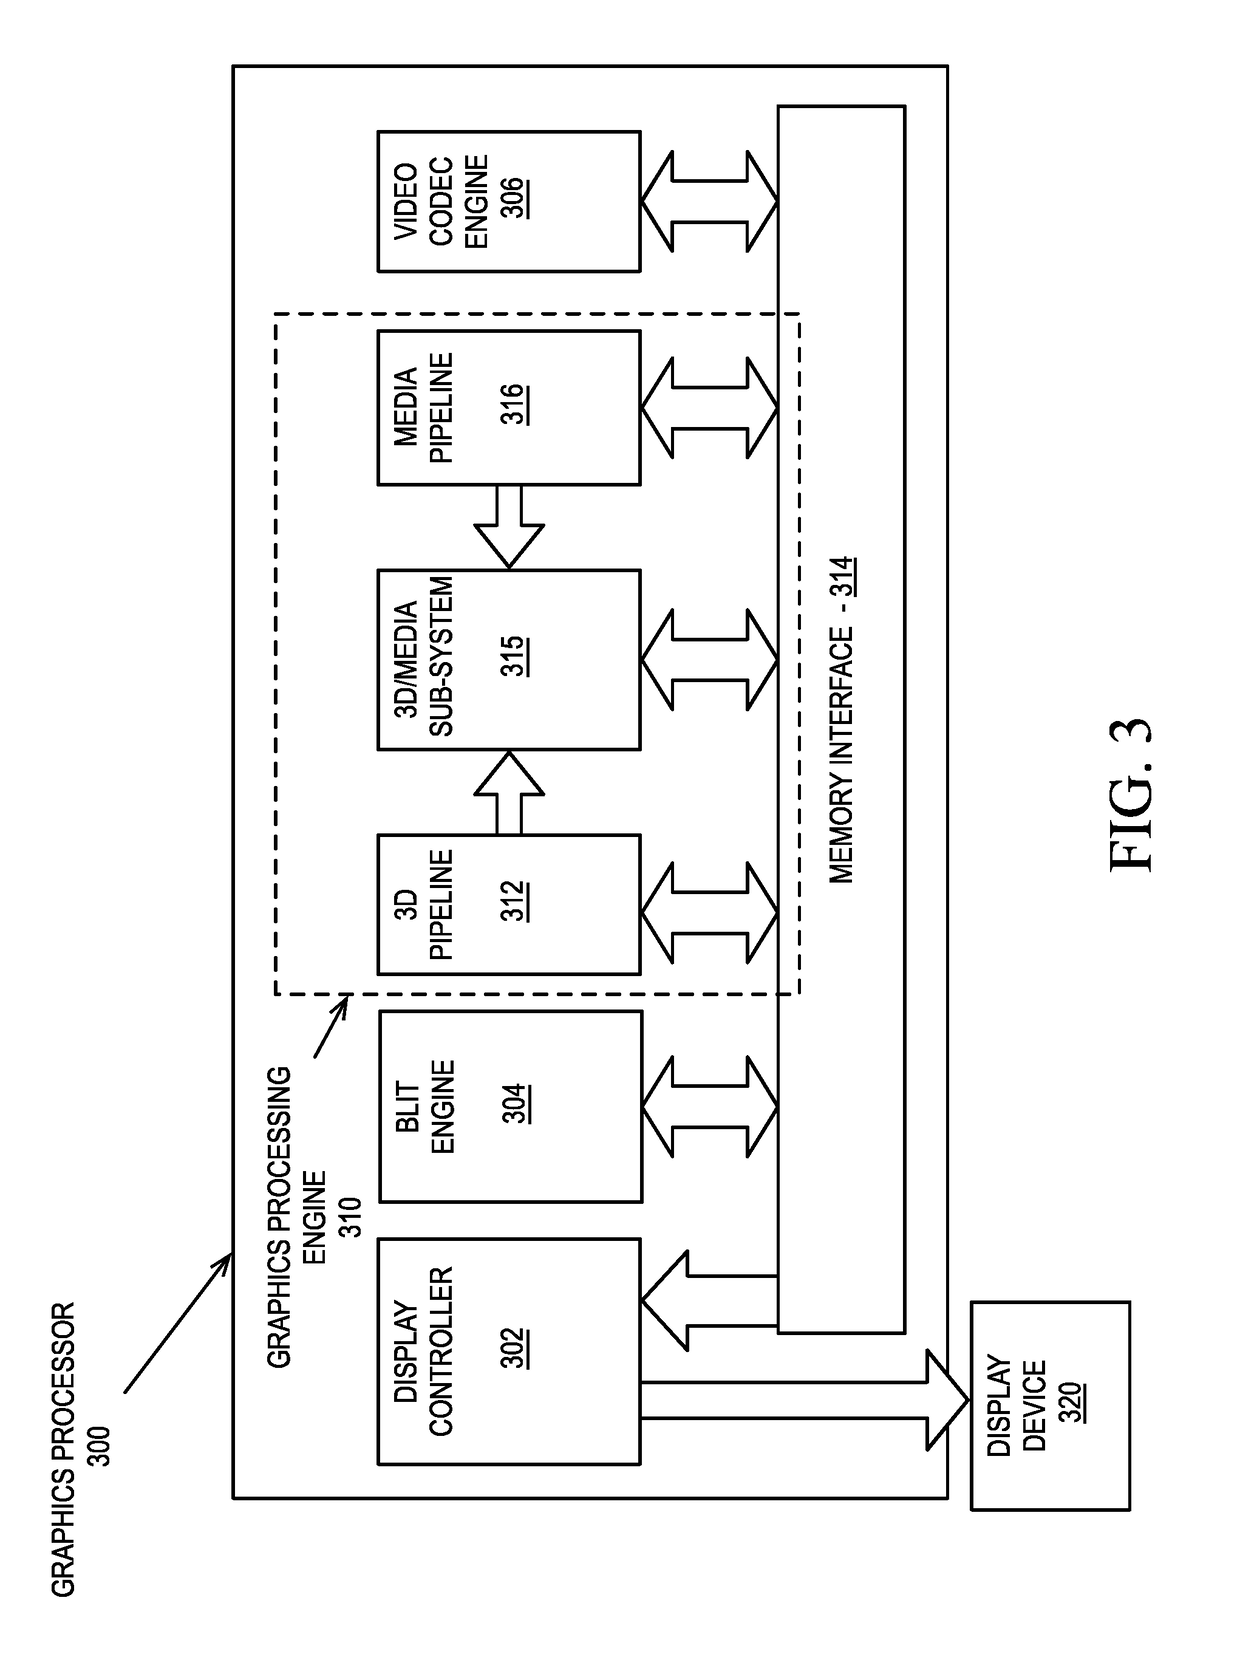 System and method for an optimized winograd convolution accelerator